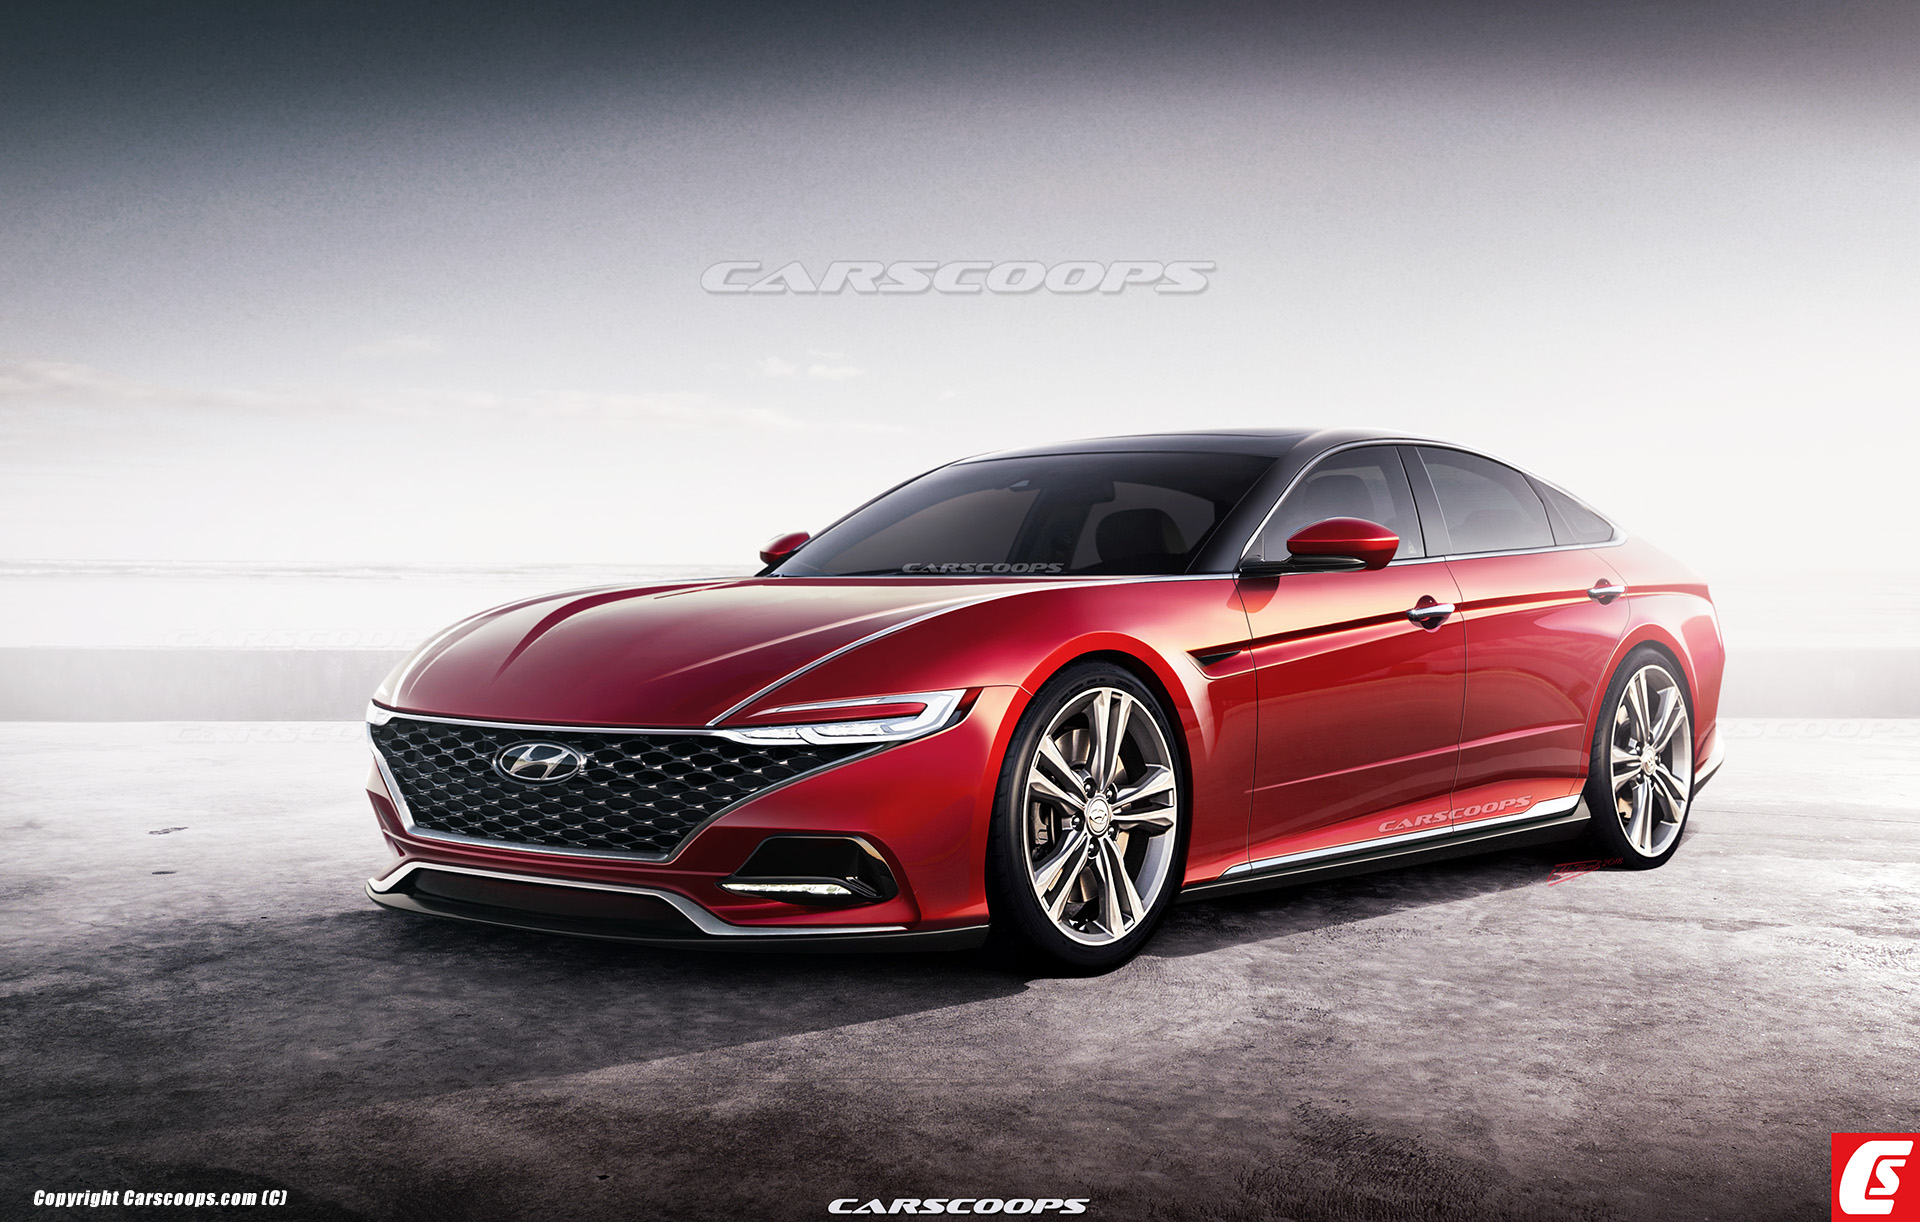 A 2020 Hyundai Sonata Baked With Le Fil Rouge Flair Would Be A ...